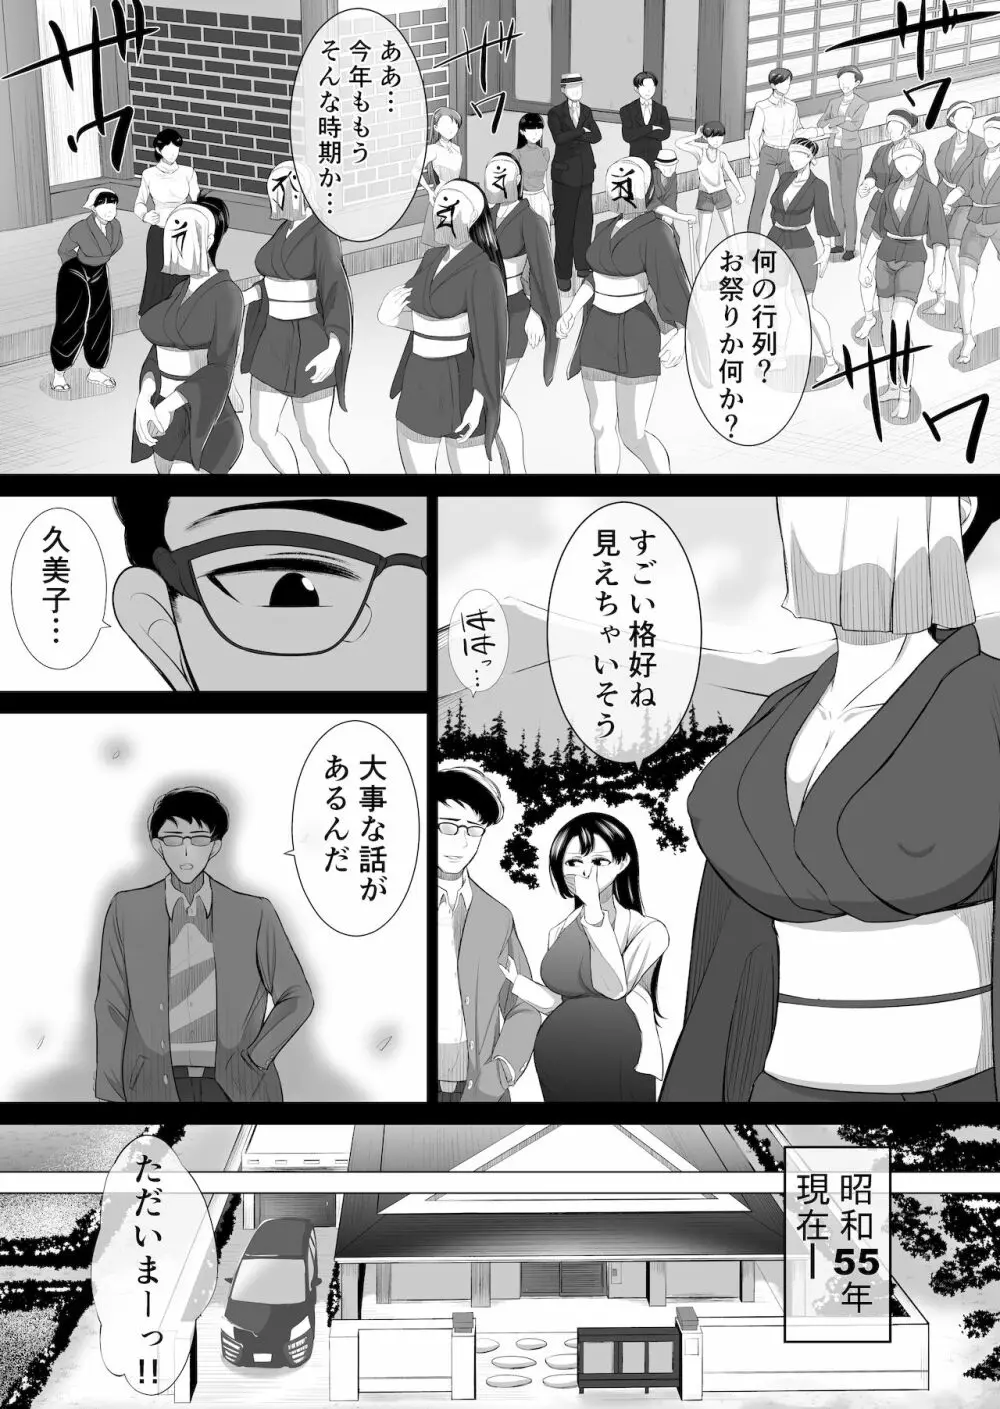 The 神孕村～やっくをやっつけろの巻～ Page.7